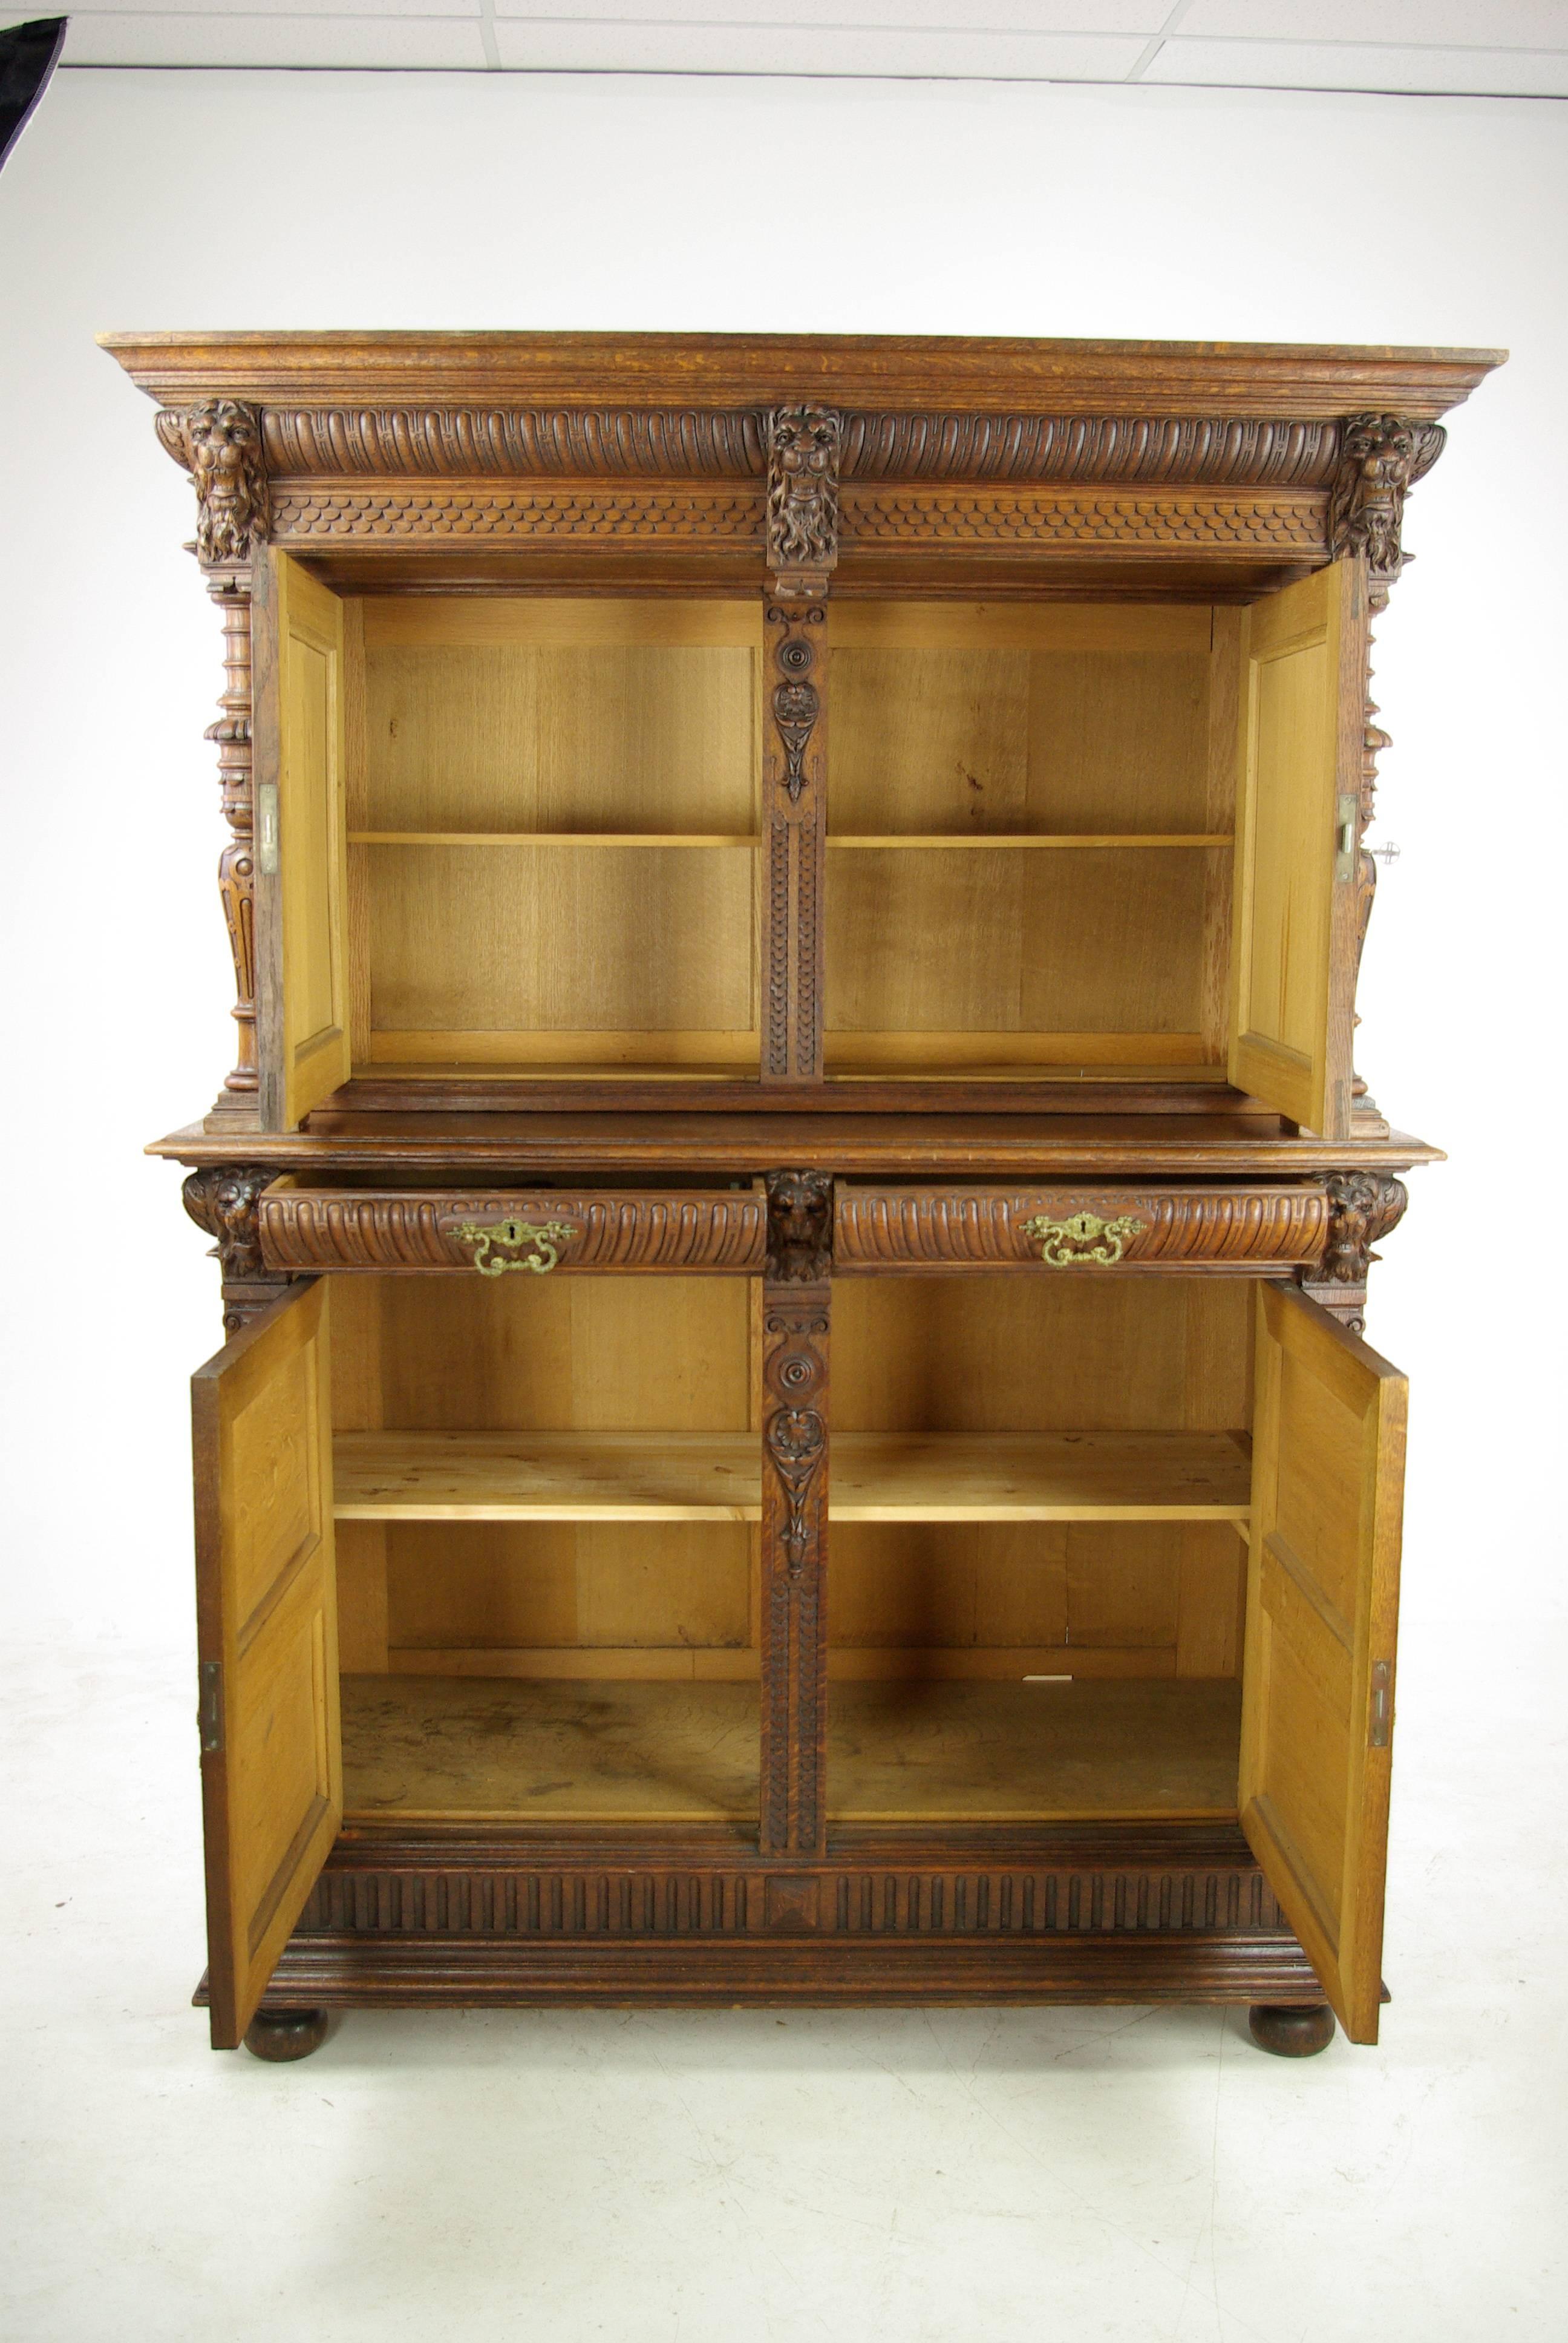 French Renaissance cabinet, heavily carved cabinet, France 1880, antique furniture, B1124

France, 1880
Solid oak construction
Heavily carved cornice above
Pair of carved paneled doors with single shelf interior
Two dovetailed drawers with original